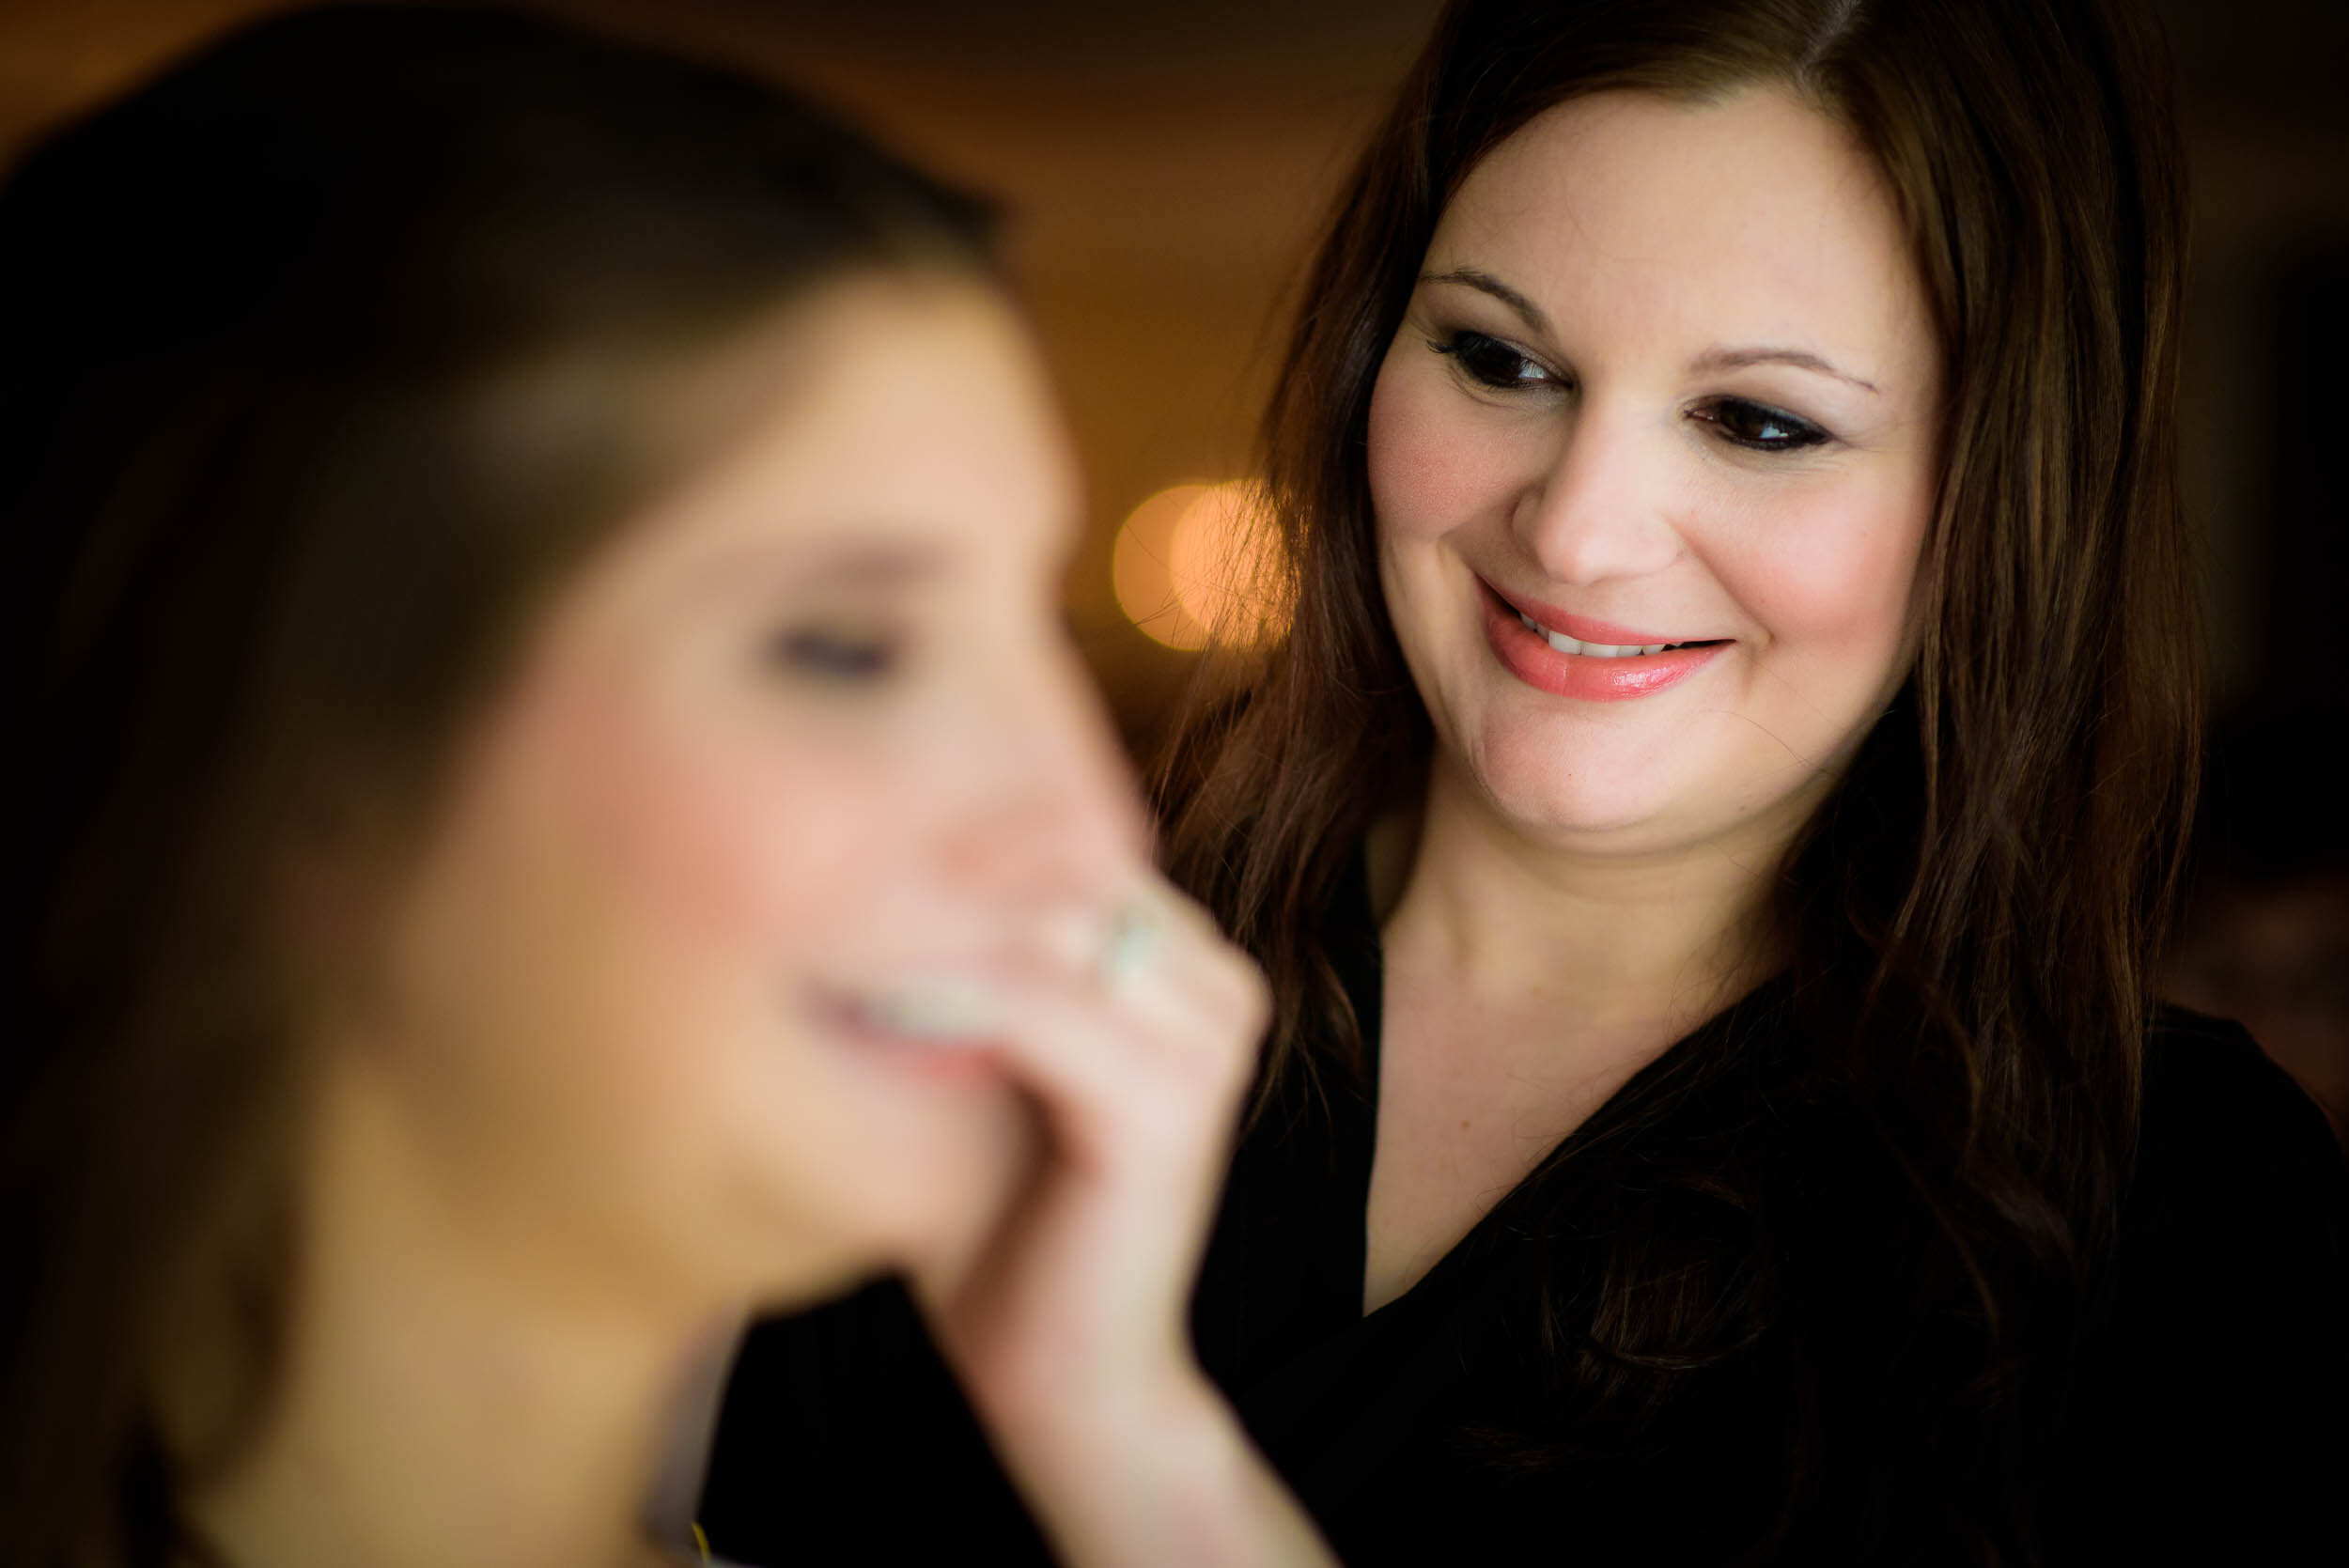 Maid of honor helping the bride get ready: Ravenswood Event Center Chicago wedding captured by J. Brown Photography.  